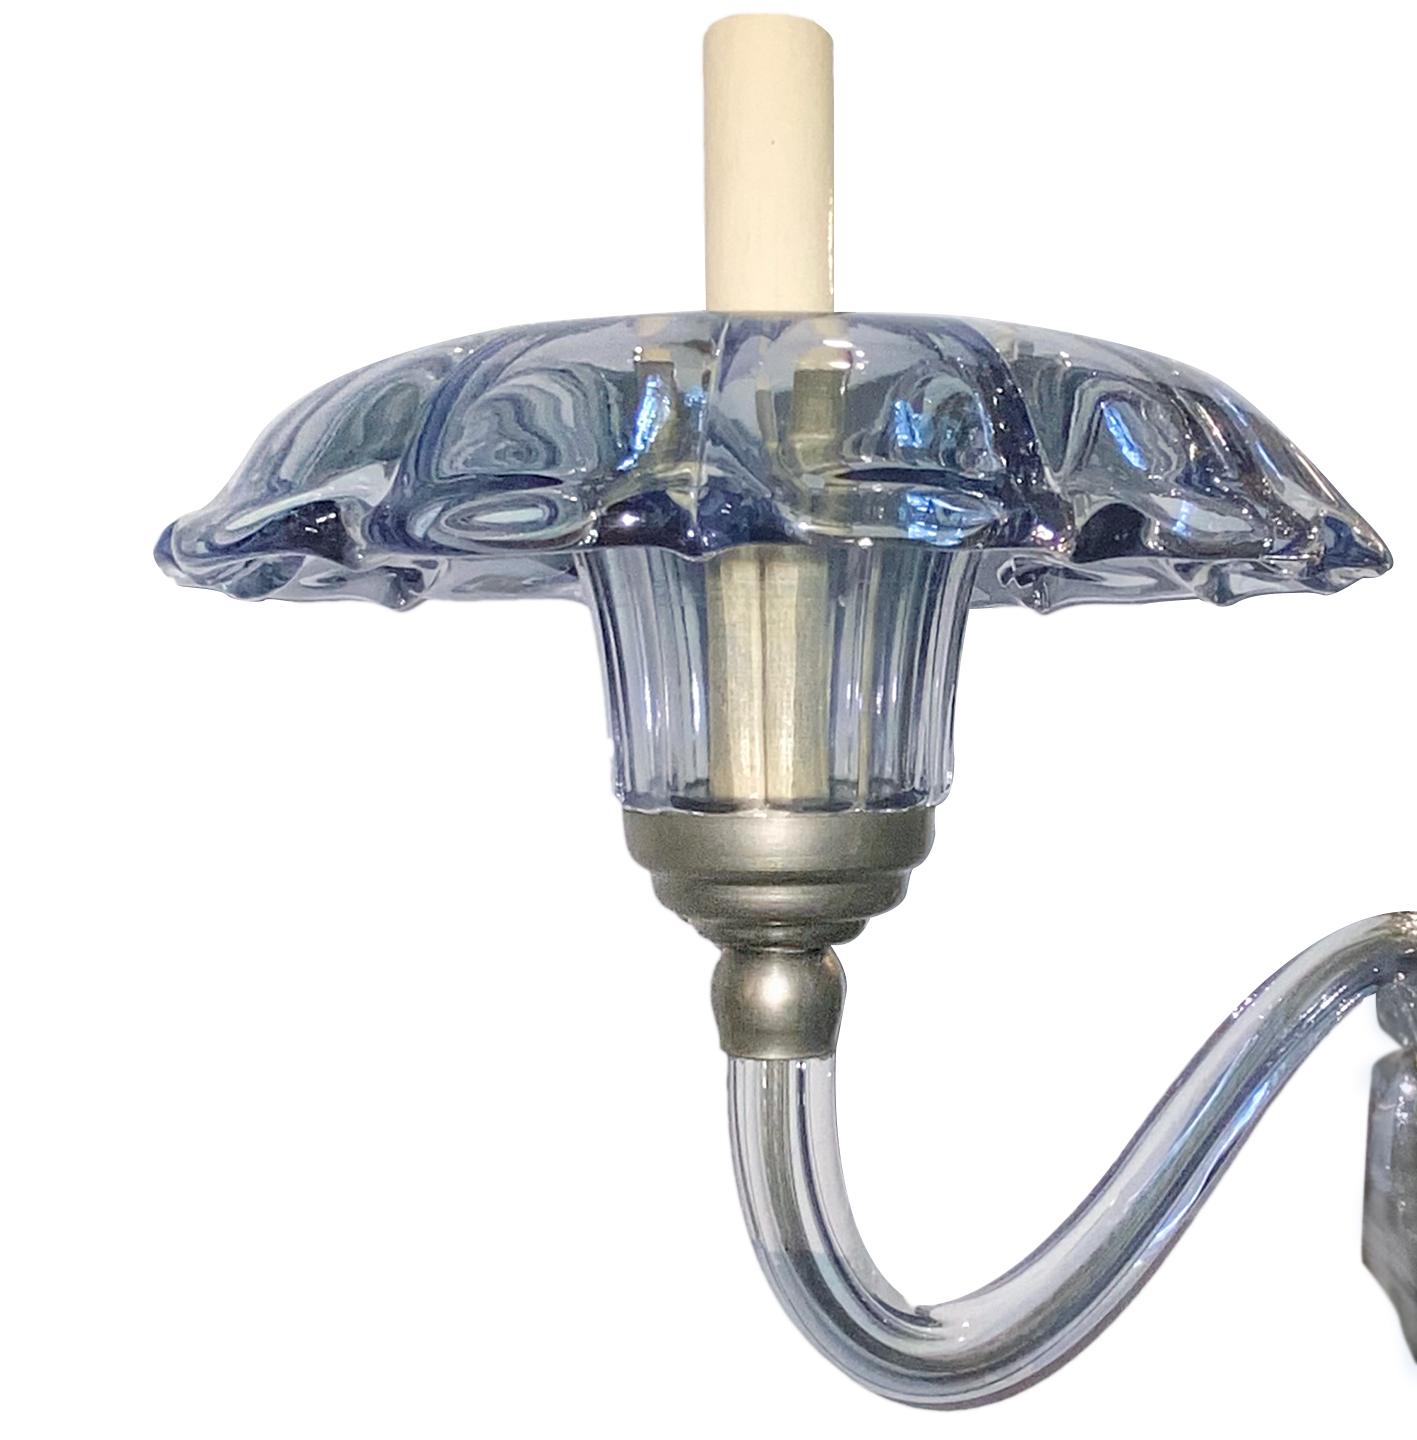 A circa 1950's light blue Murano glass eight-arm chandelier with a faceted body.

Measurements:
Minimum drop: 33.5